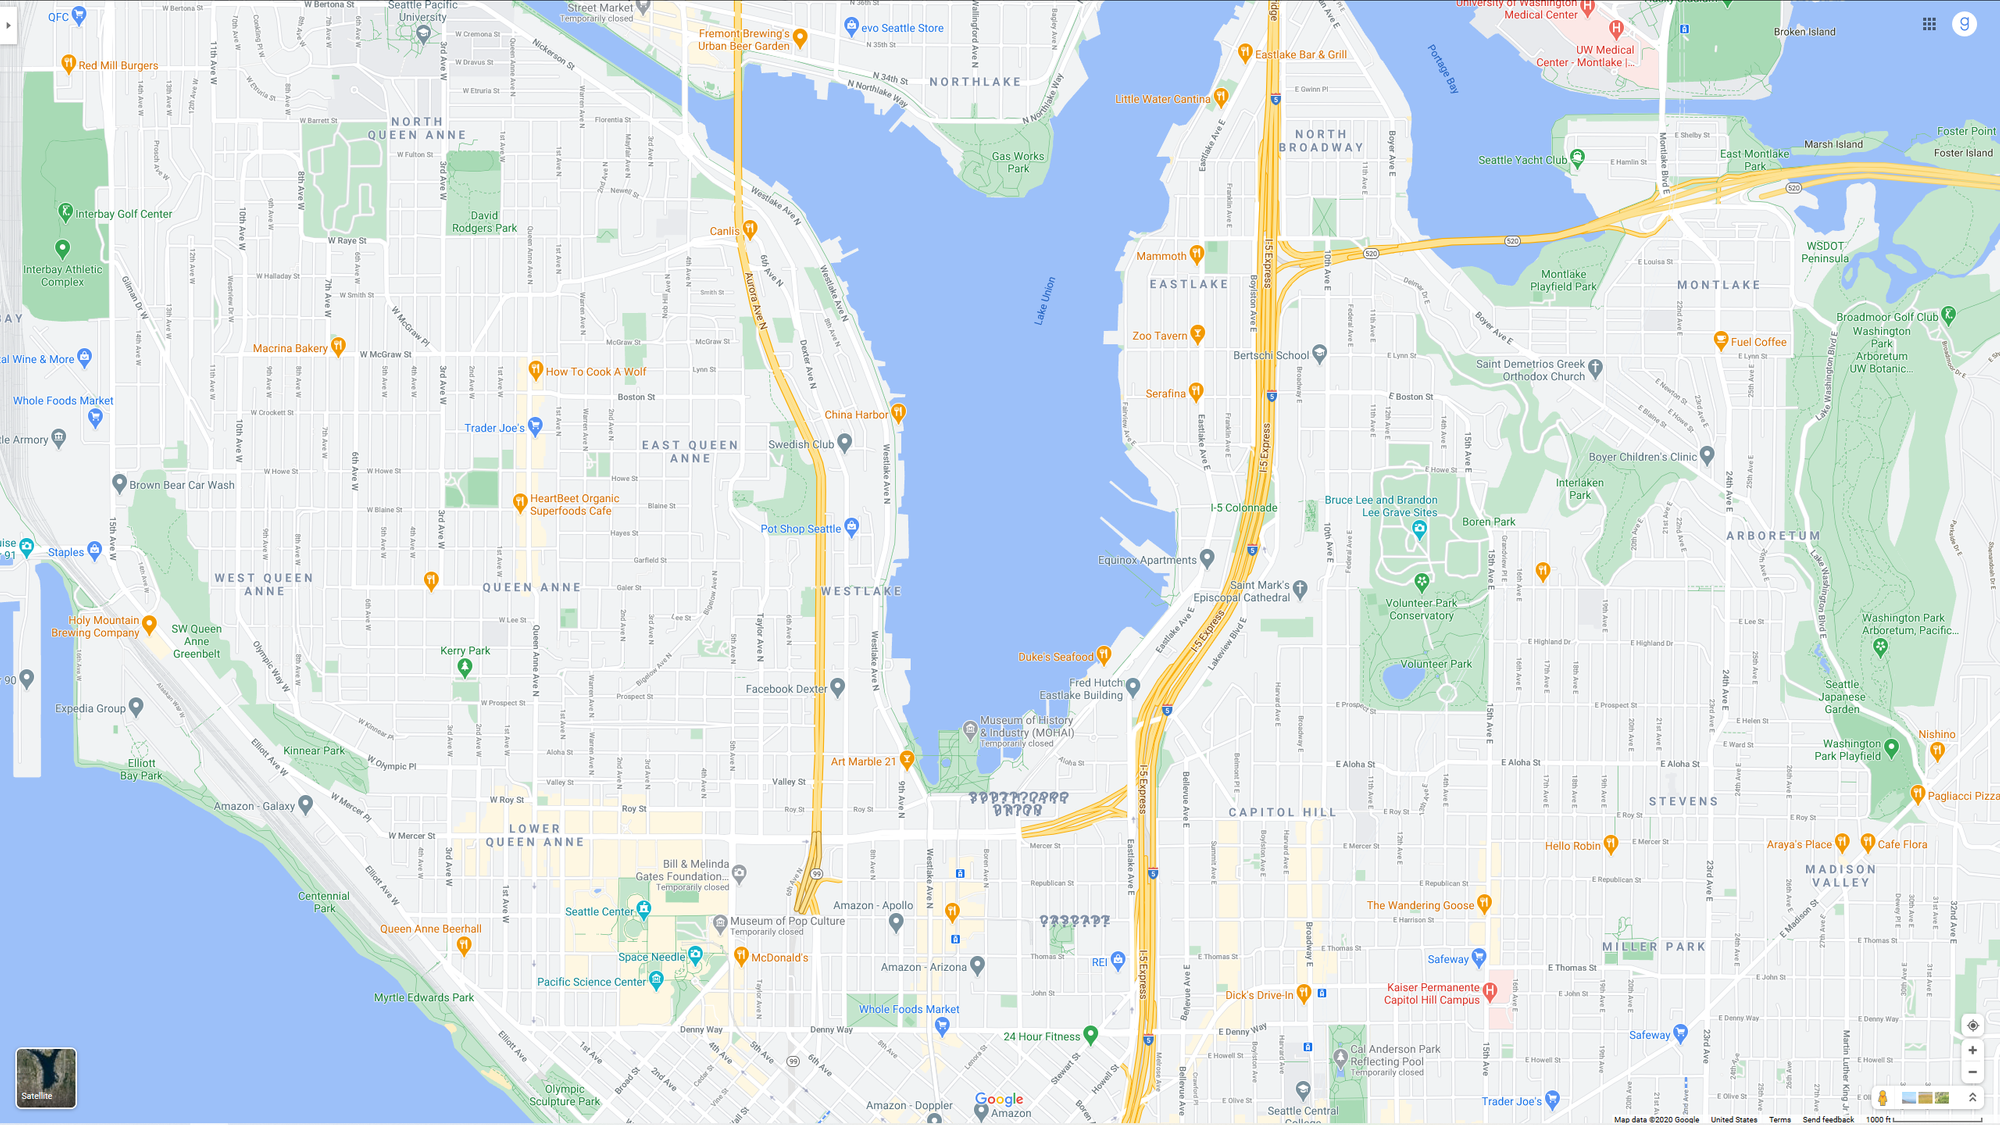 What is South Lake Union?